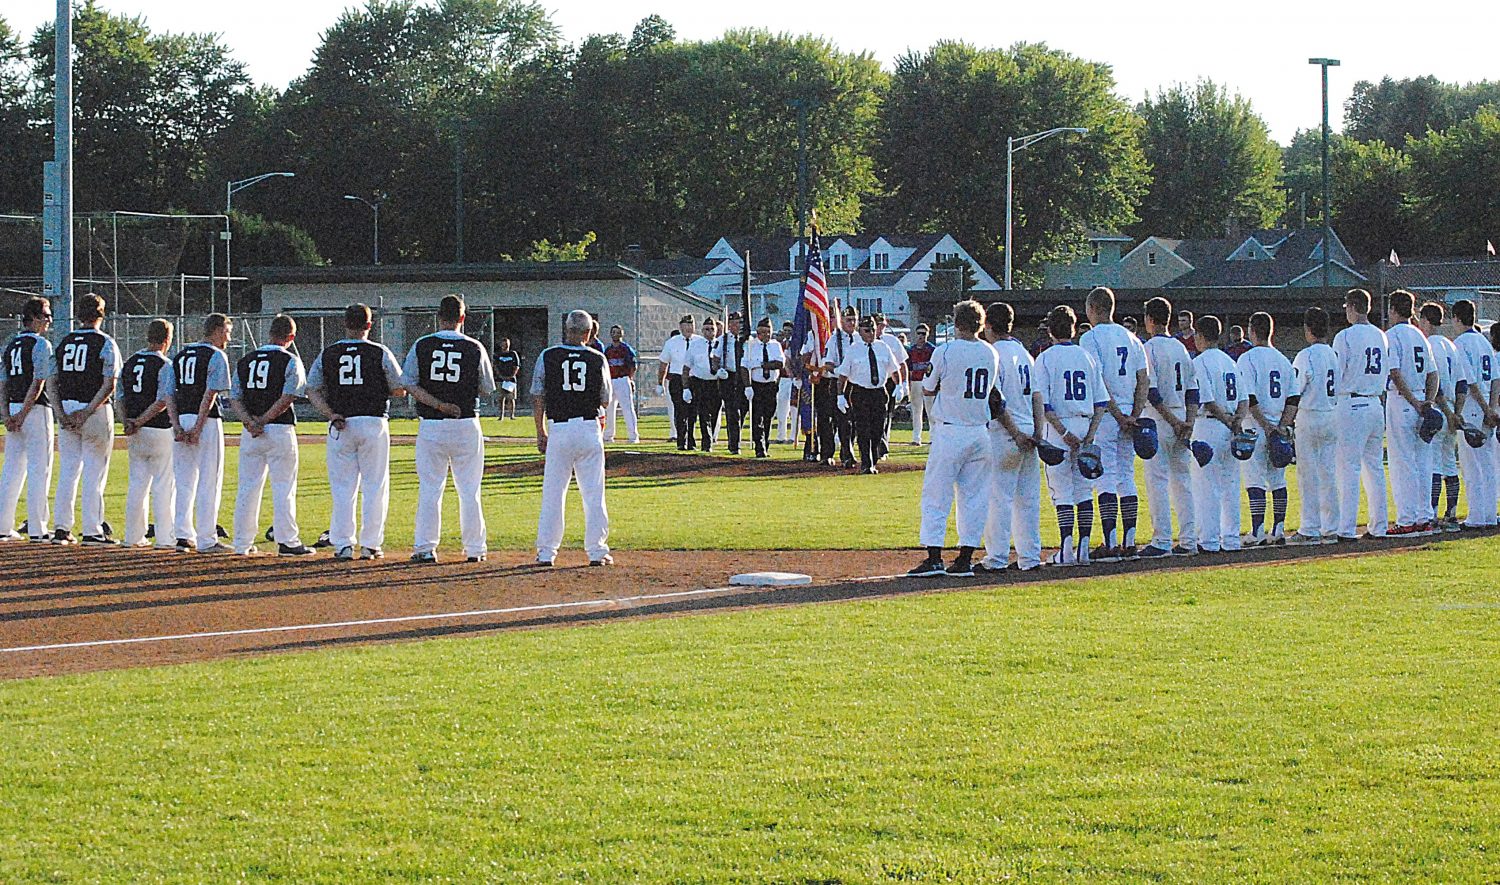 Teams participate in opening ceremonies at the Wisconsin Class AAA State American Legion Baseball Tournament at Jack Hackman Field in Marshfield in July 2016. Marshfield will host the state junior 17U state tournament July 19-23, 2017, at Hackman Field.